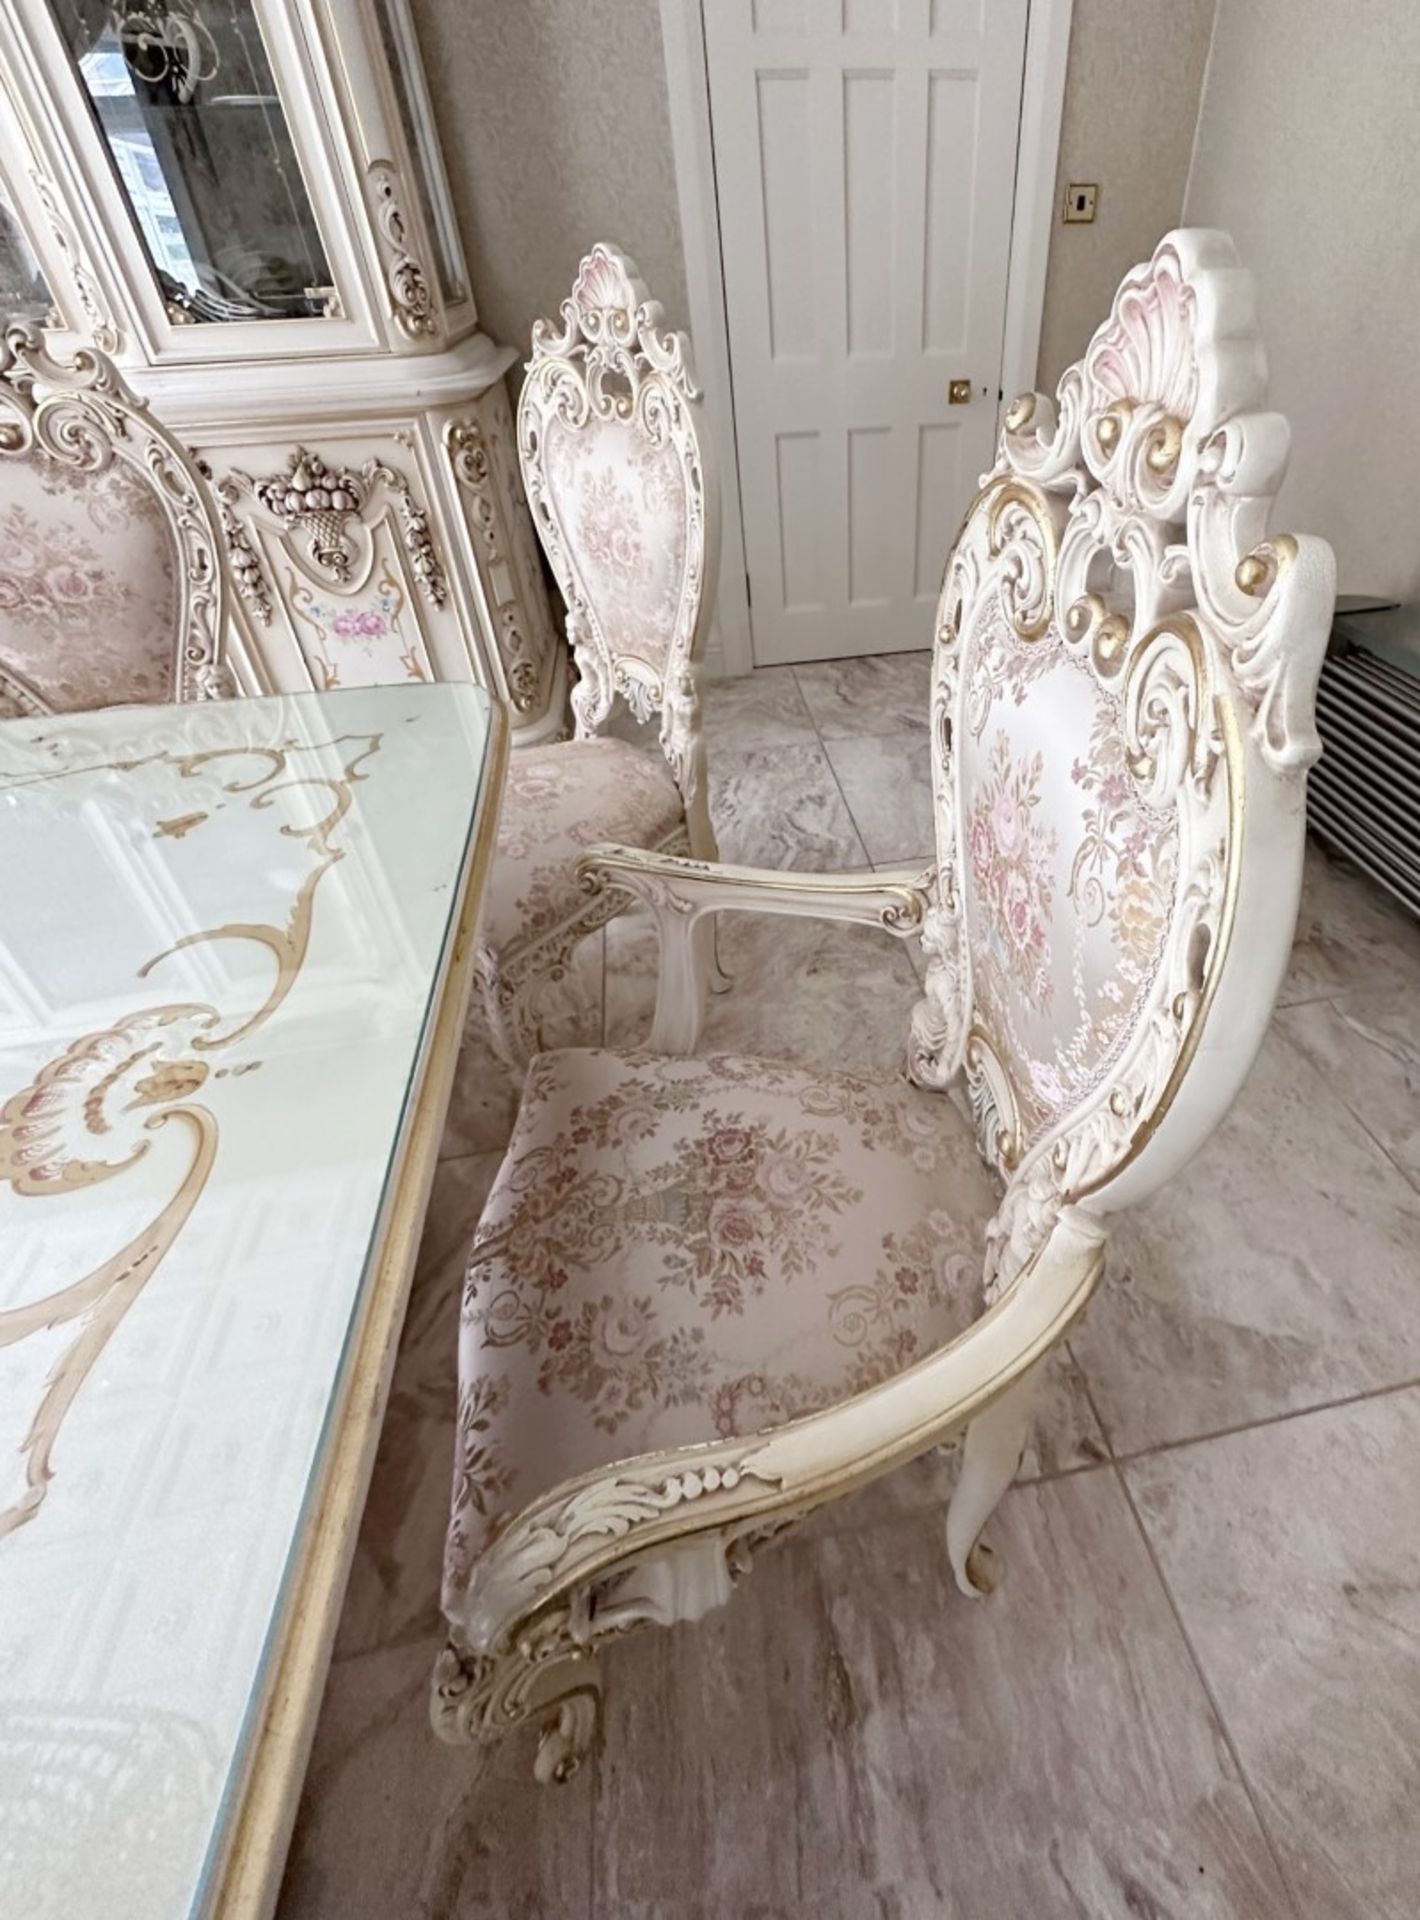 1 x EXQUISITE Handcrafted In Italy Venetian Style Dining Room Table And 12 Silk Backed Chairs - Image 5 of 15